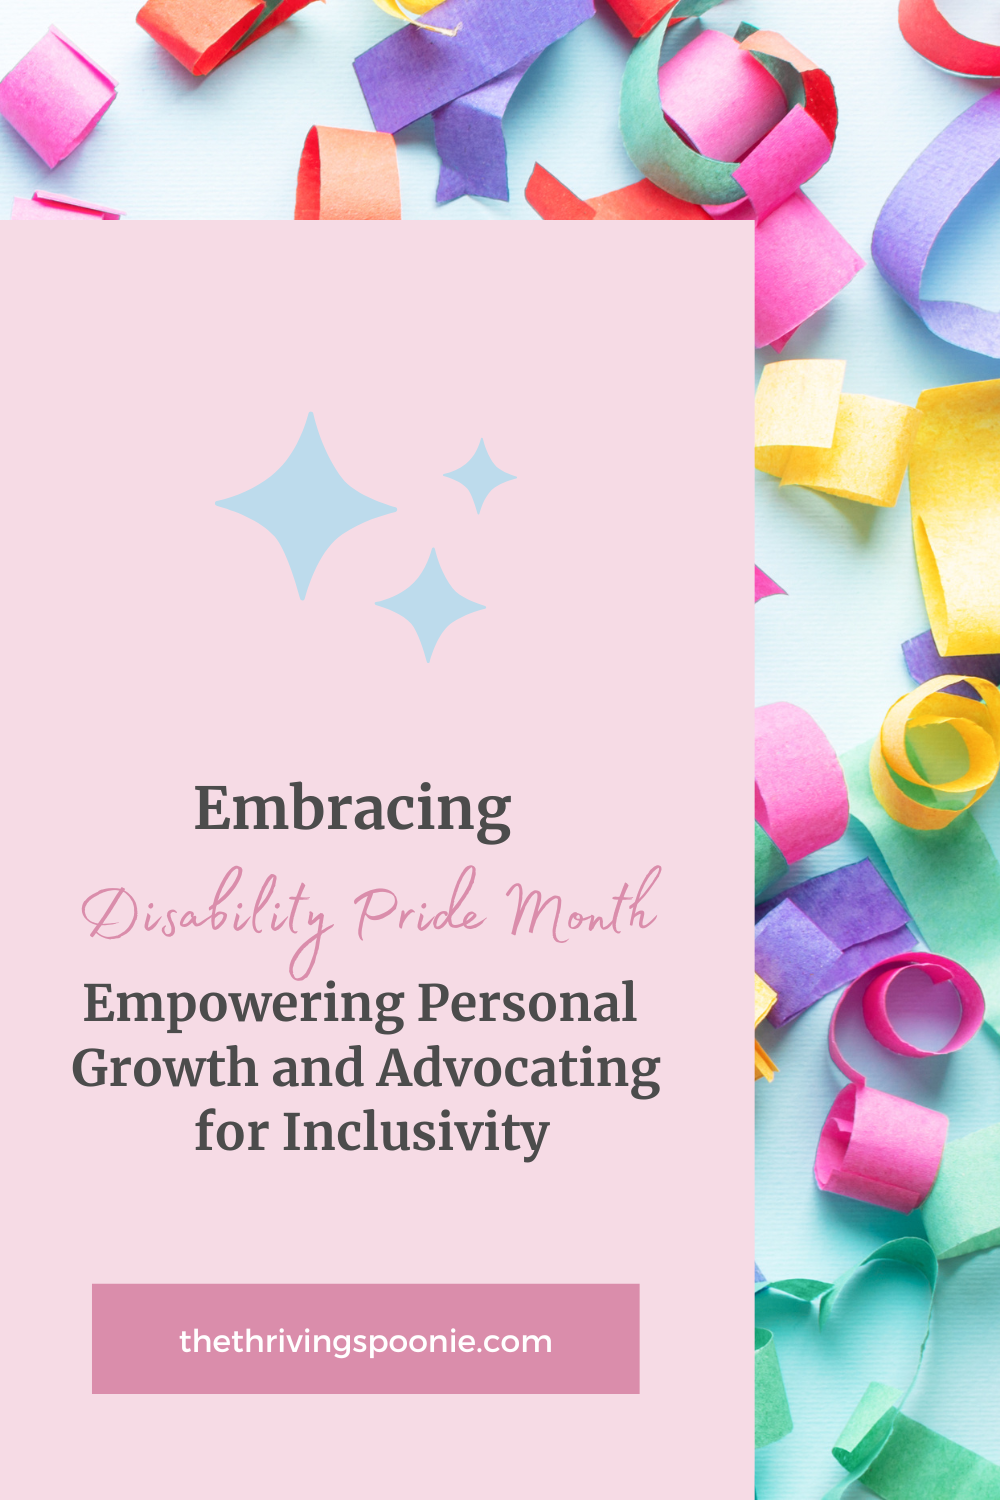 Blog Post Title Image: Empowering Personal Growth and Advocating for Inclusivity